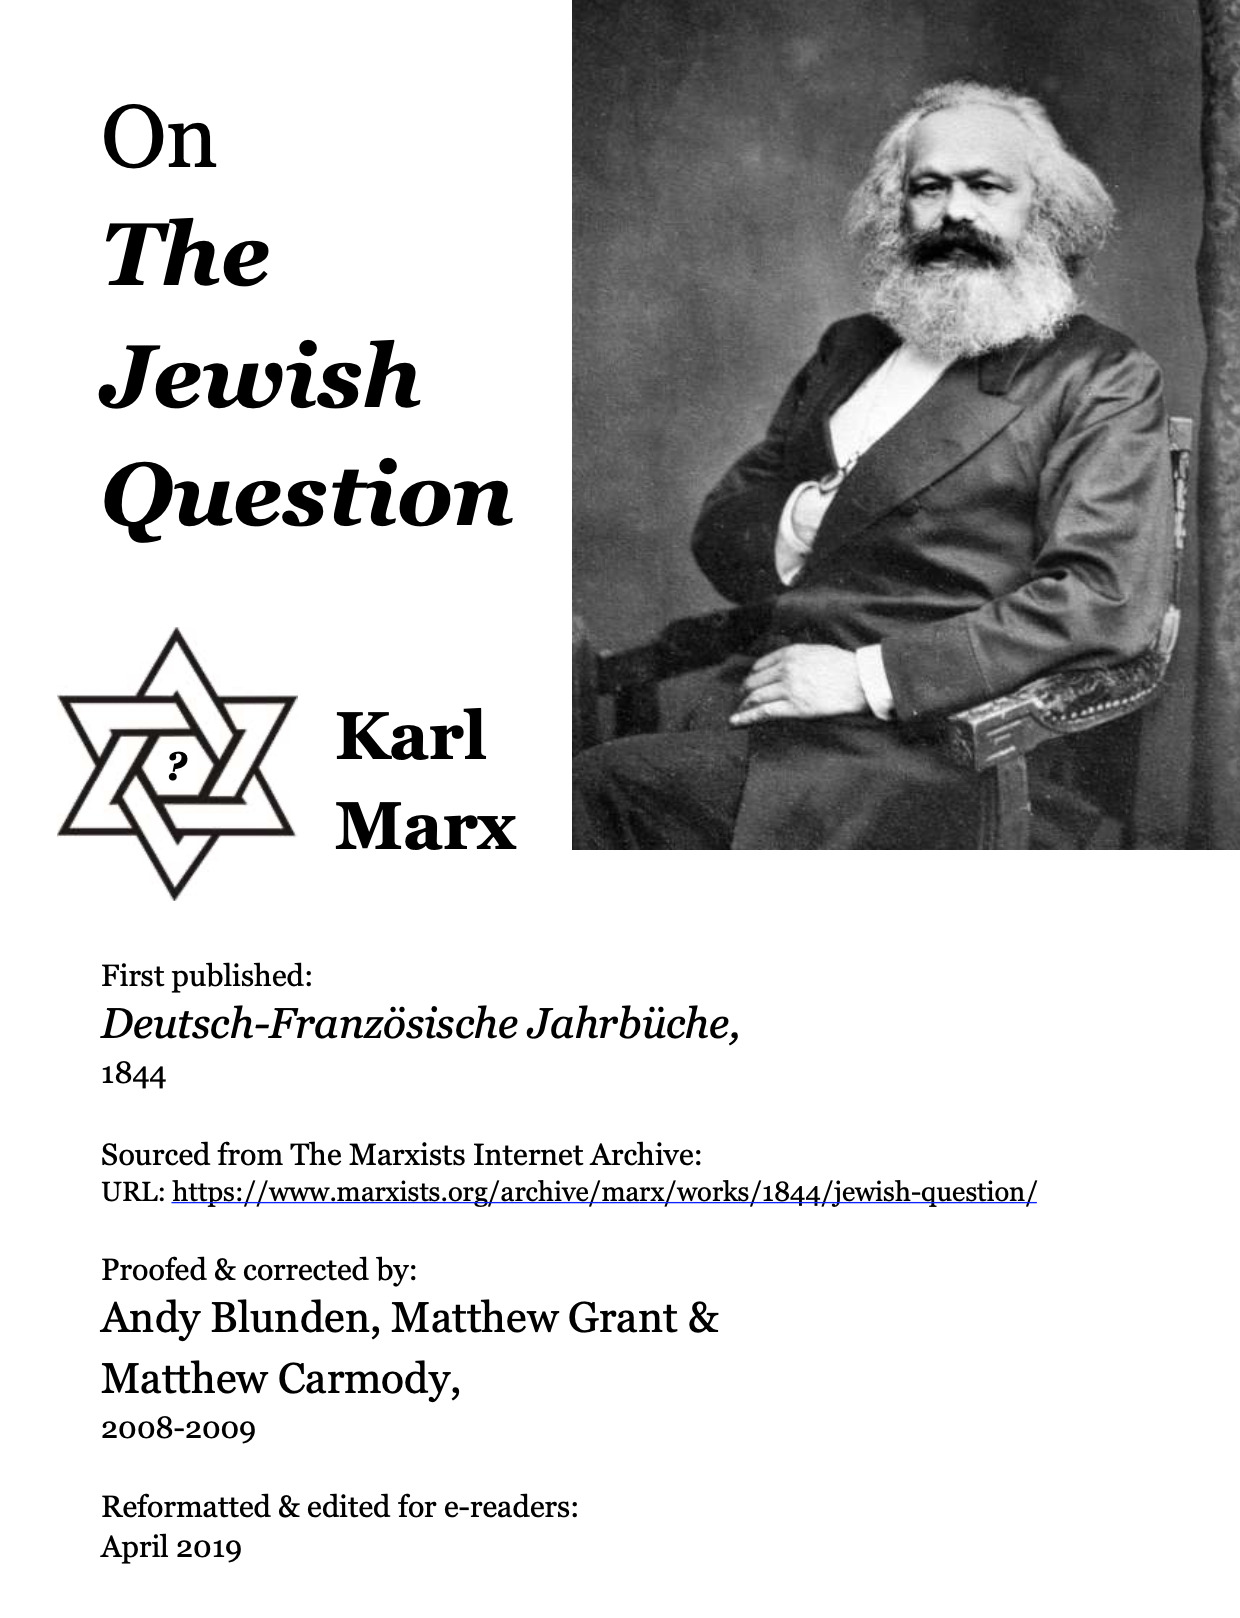 On the Jewish Question (1844) by Marx, Karl, 1818-1883